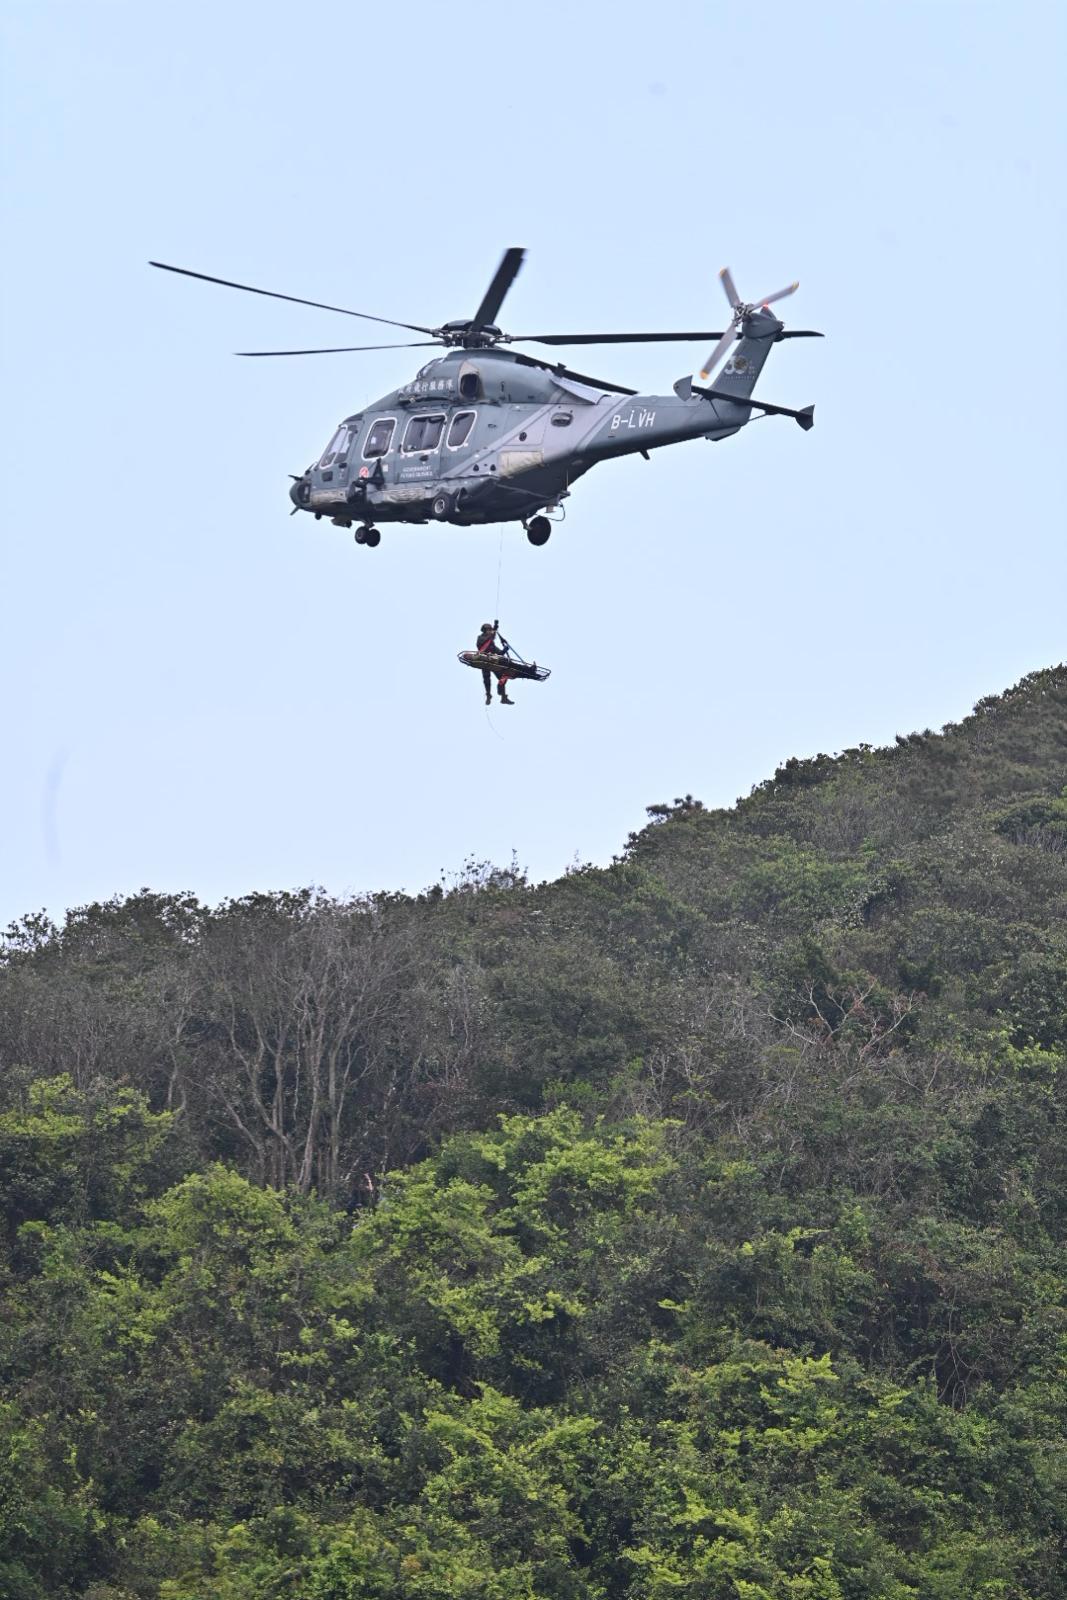 Police Hong Kong Island Regional Headquarters conducted an inter-departmental major incident exercise codenamed "COLDMIST" with the Fire Services Department, Government Flying Service (GFS), Civil Aid Service, Home Affairs Department, Agriculture, Fisheries and Conservation Department and Water Supplies Department at Aberdeen Country Park this afternoon (March 27). Photo shows GFS officers rescuing an injured person with a helicopter.